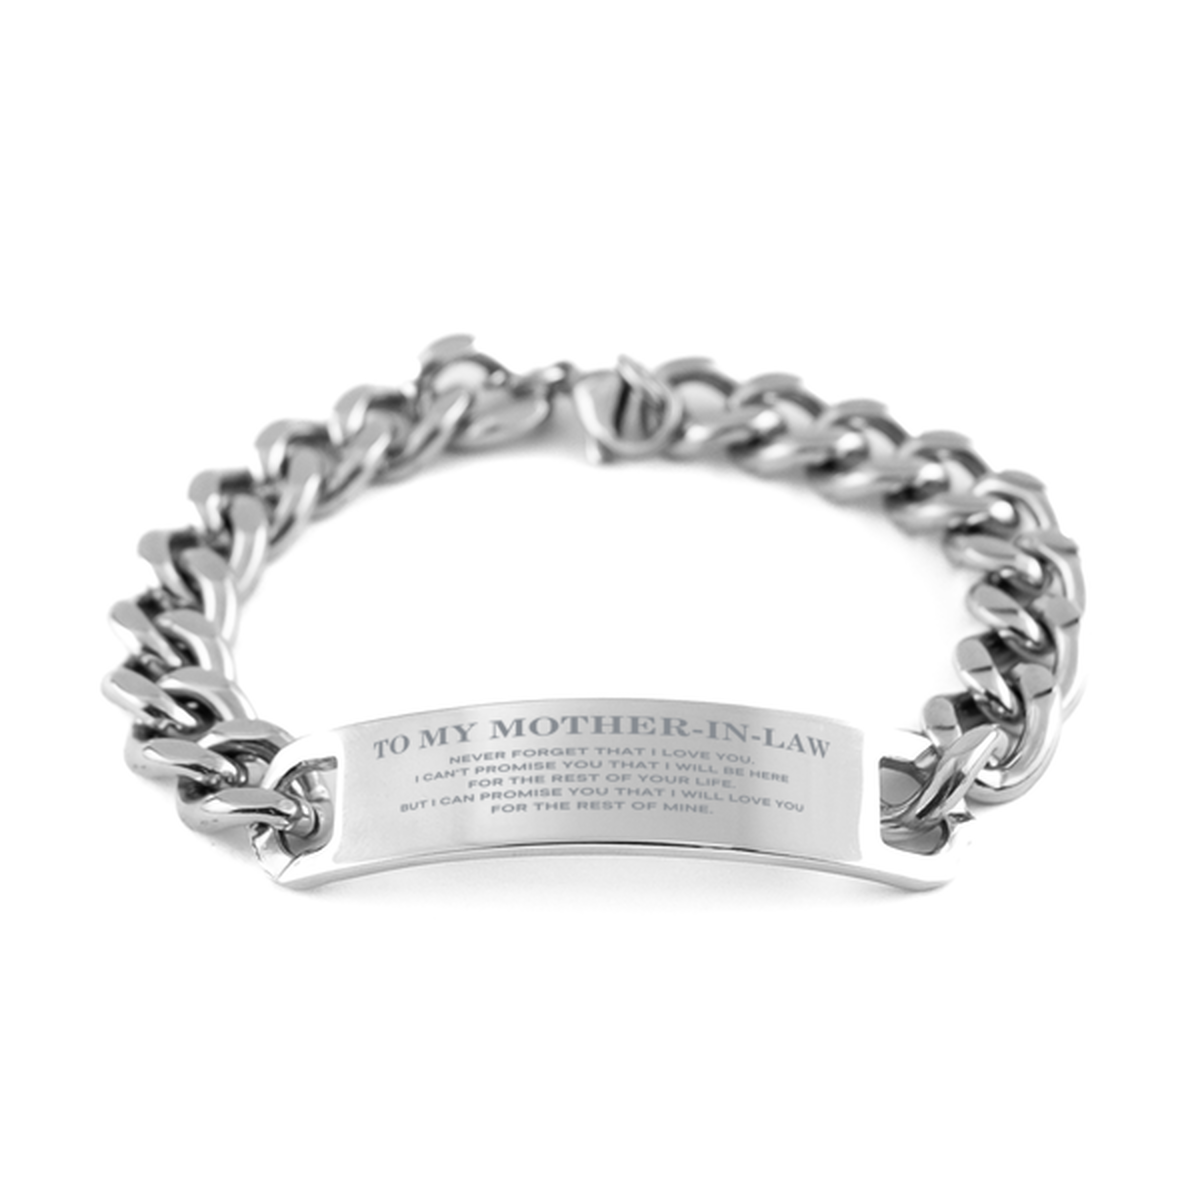 To My Mother-In-Law Gifts, I will love you for the rest of mine, Love Mother-In-Law Bracelet, Birthday Christmas Unique Cuban Chain Stainless Steel Bracelet For Mother-In-Law